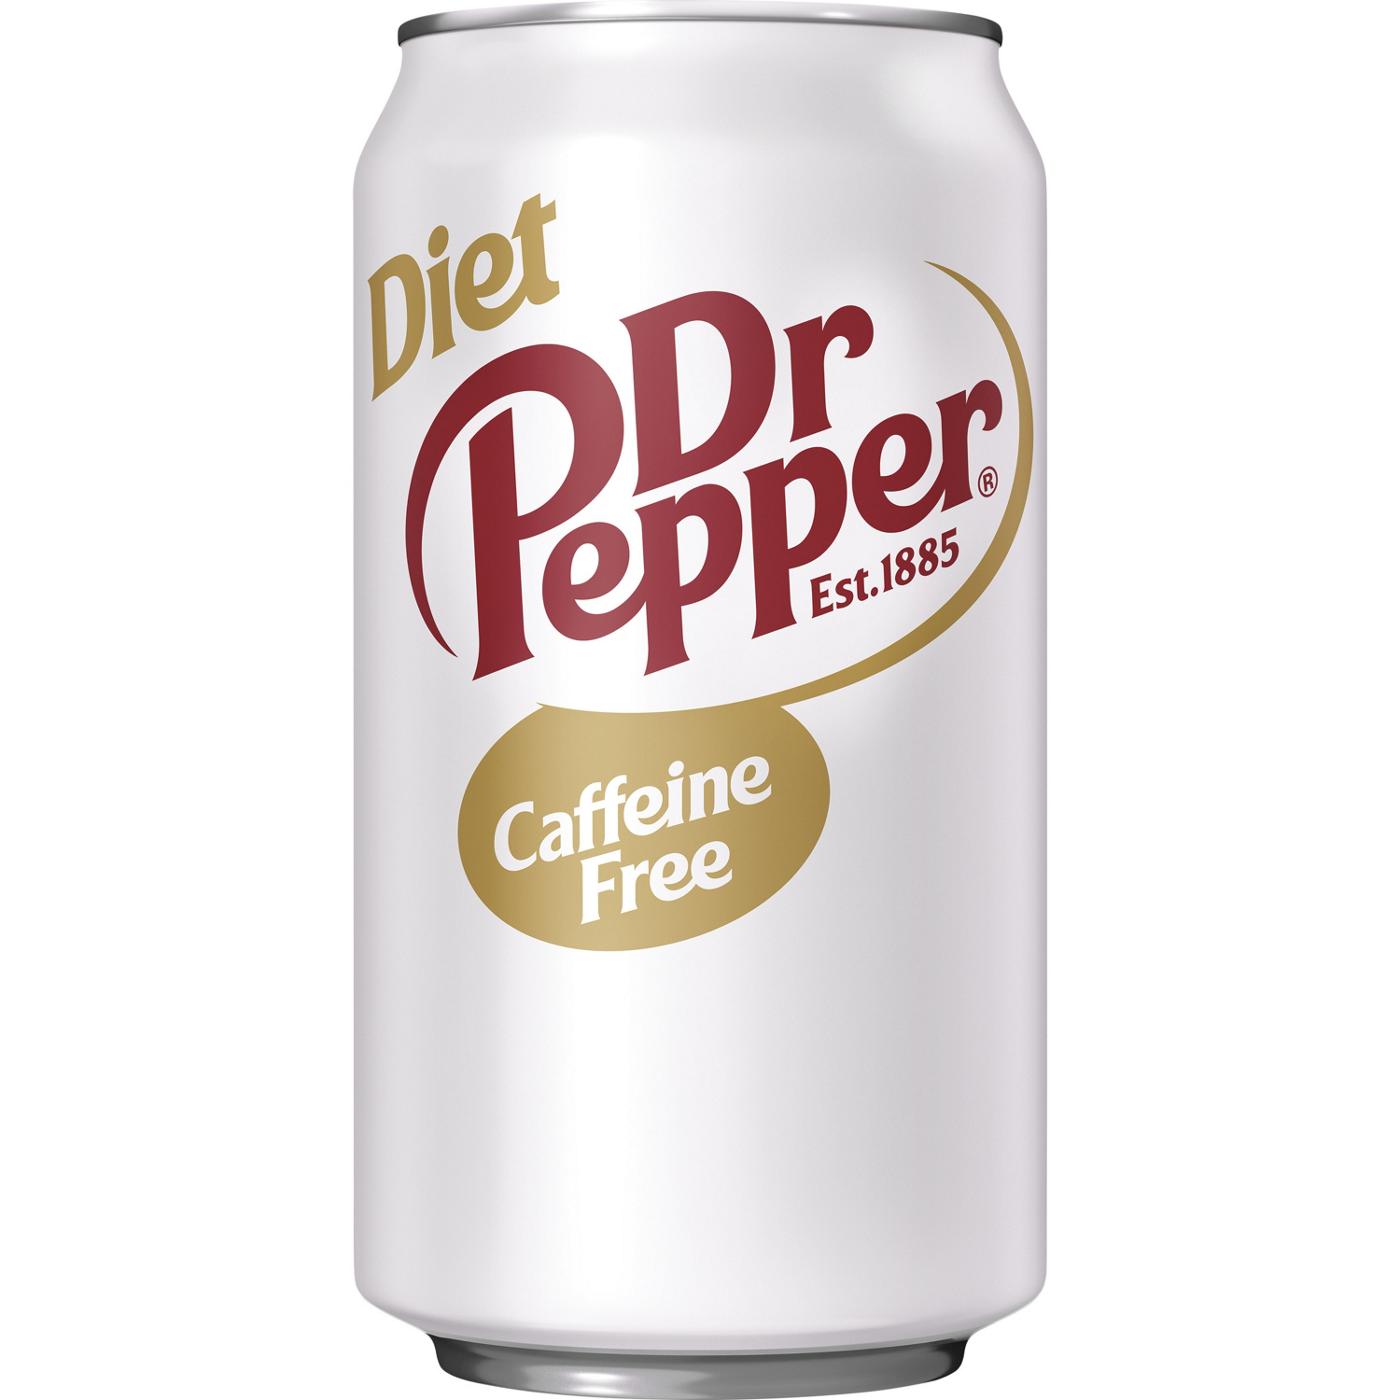 Dr Pepper Caffeine Free Diet Soda 12 oz Cans; image 4 of 7